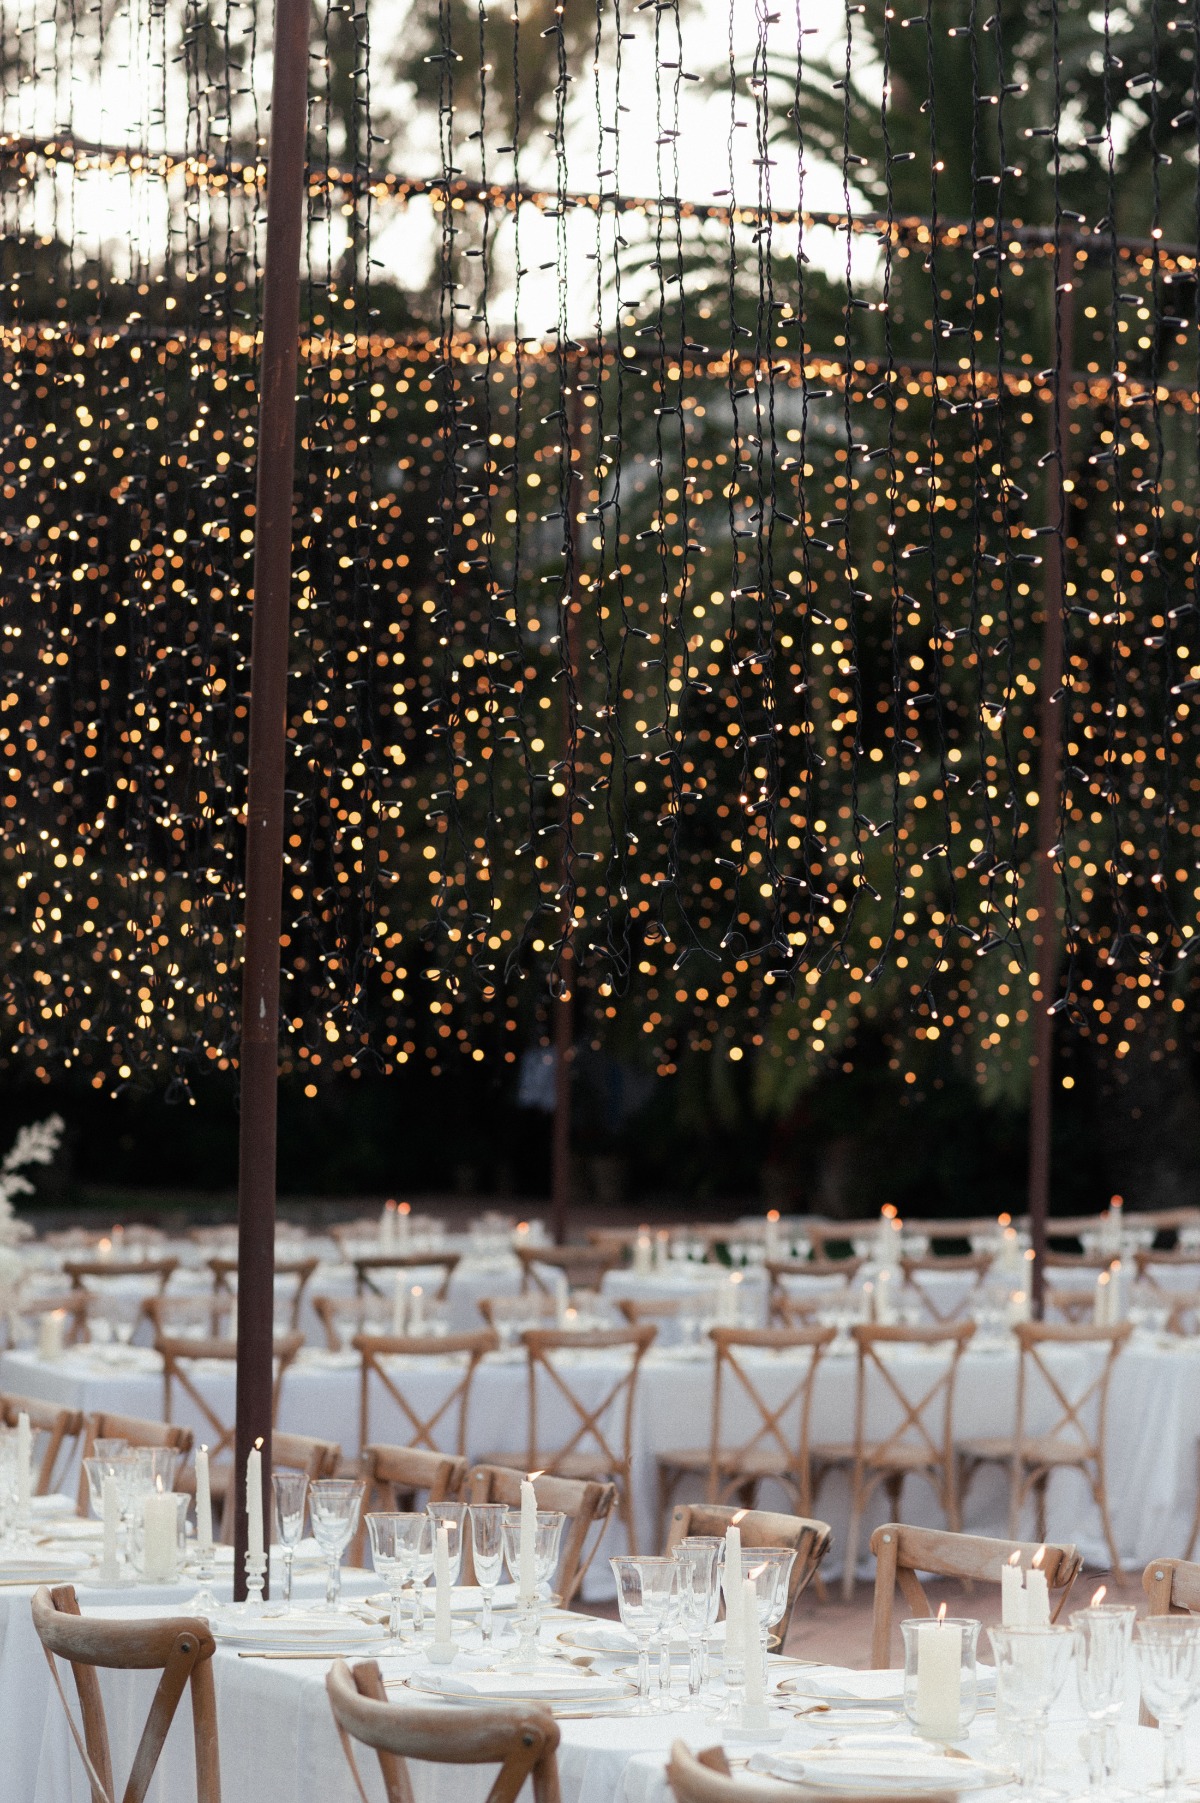 Reception tables with gold-rimmed glasses and string lights